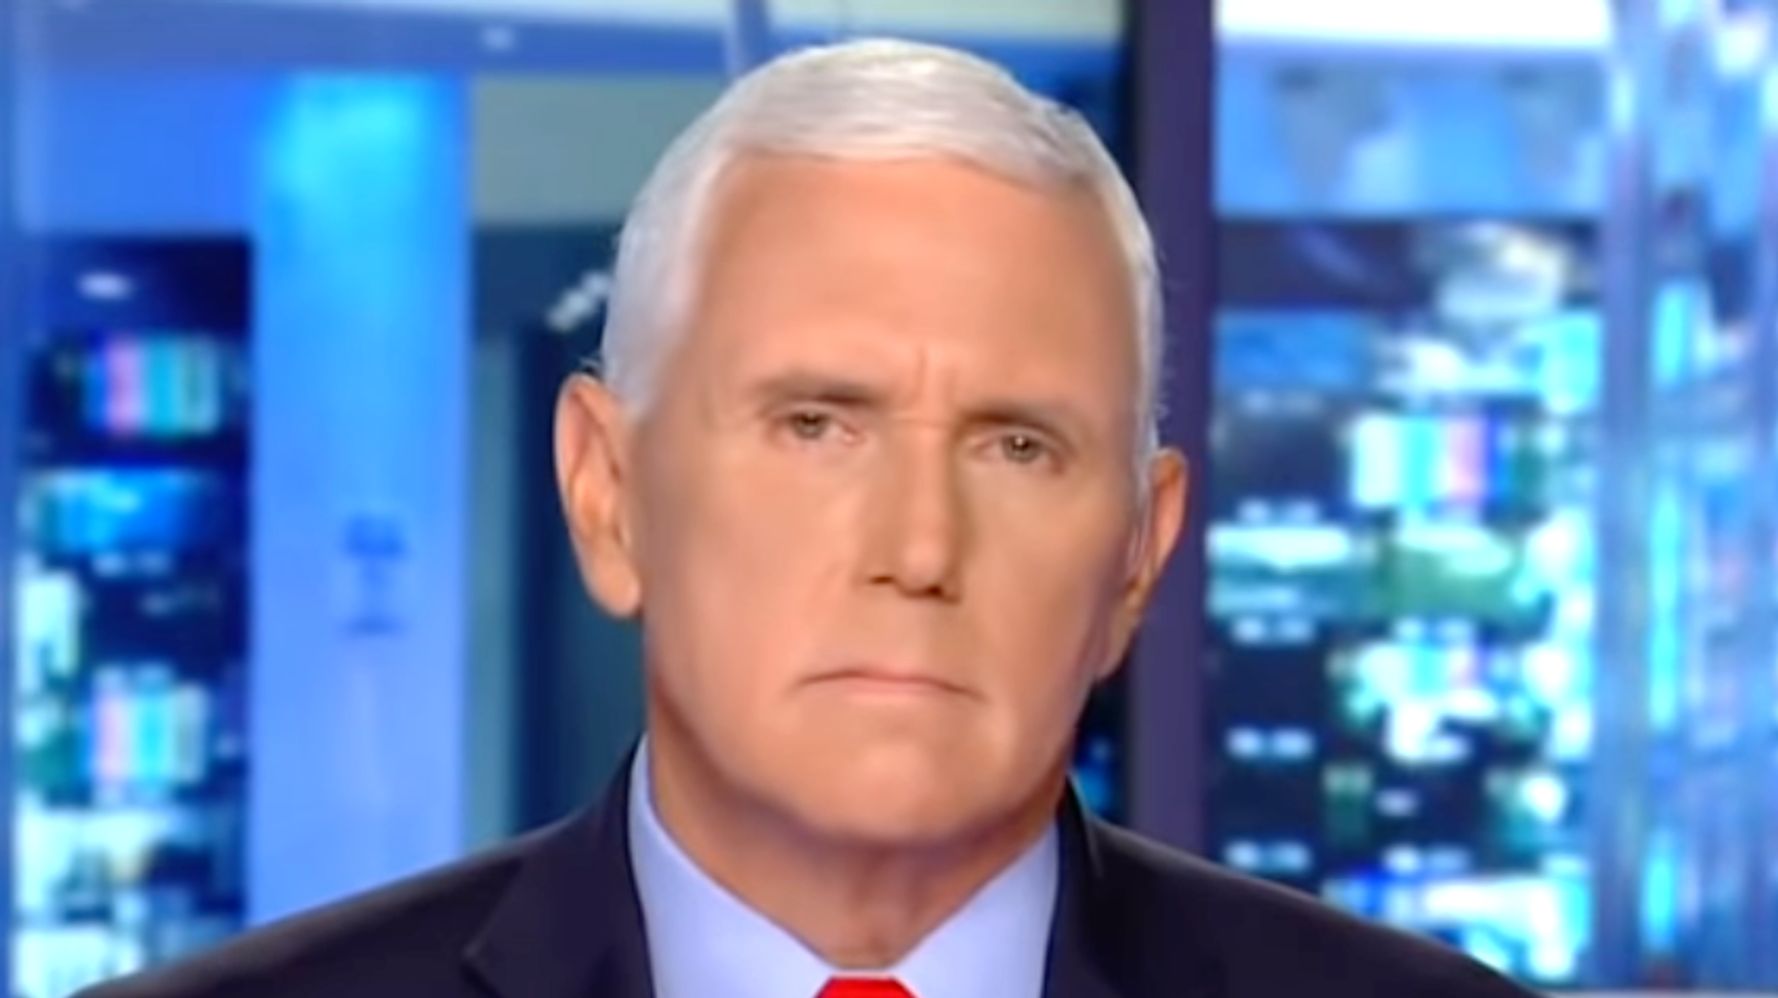 Mike Pence Tries To Spin Jan. 6 Insurrection, Gets Brutal Reminder In Response